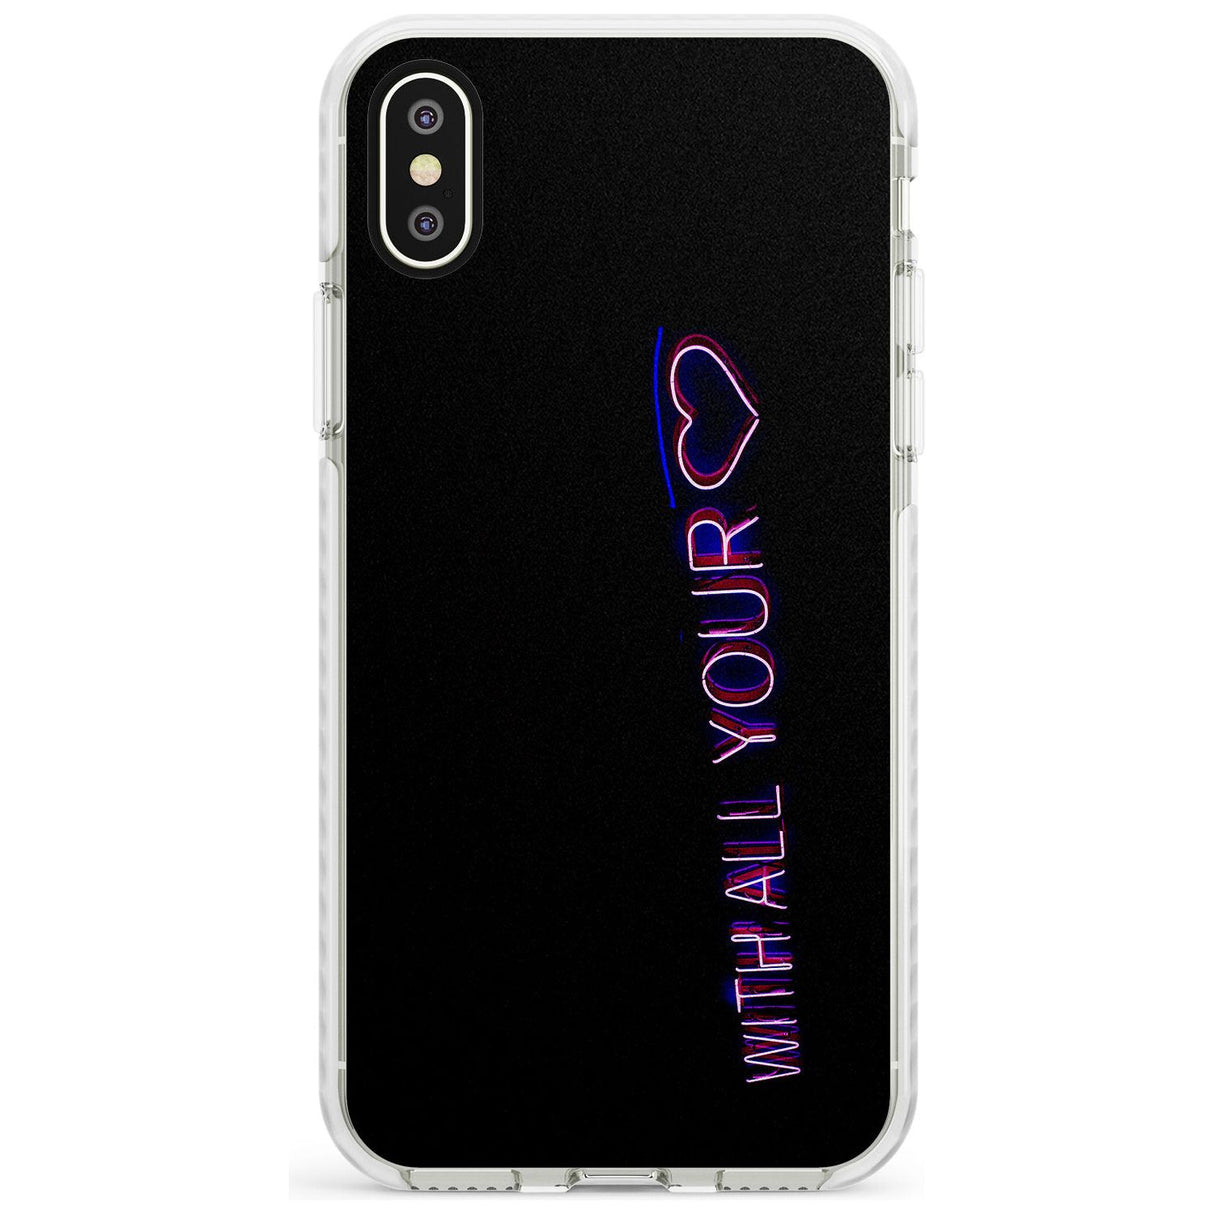 With All Your Heart Neon Sign Impact Phone Case for iPhone X XS Max XR